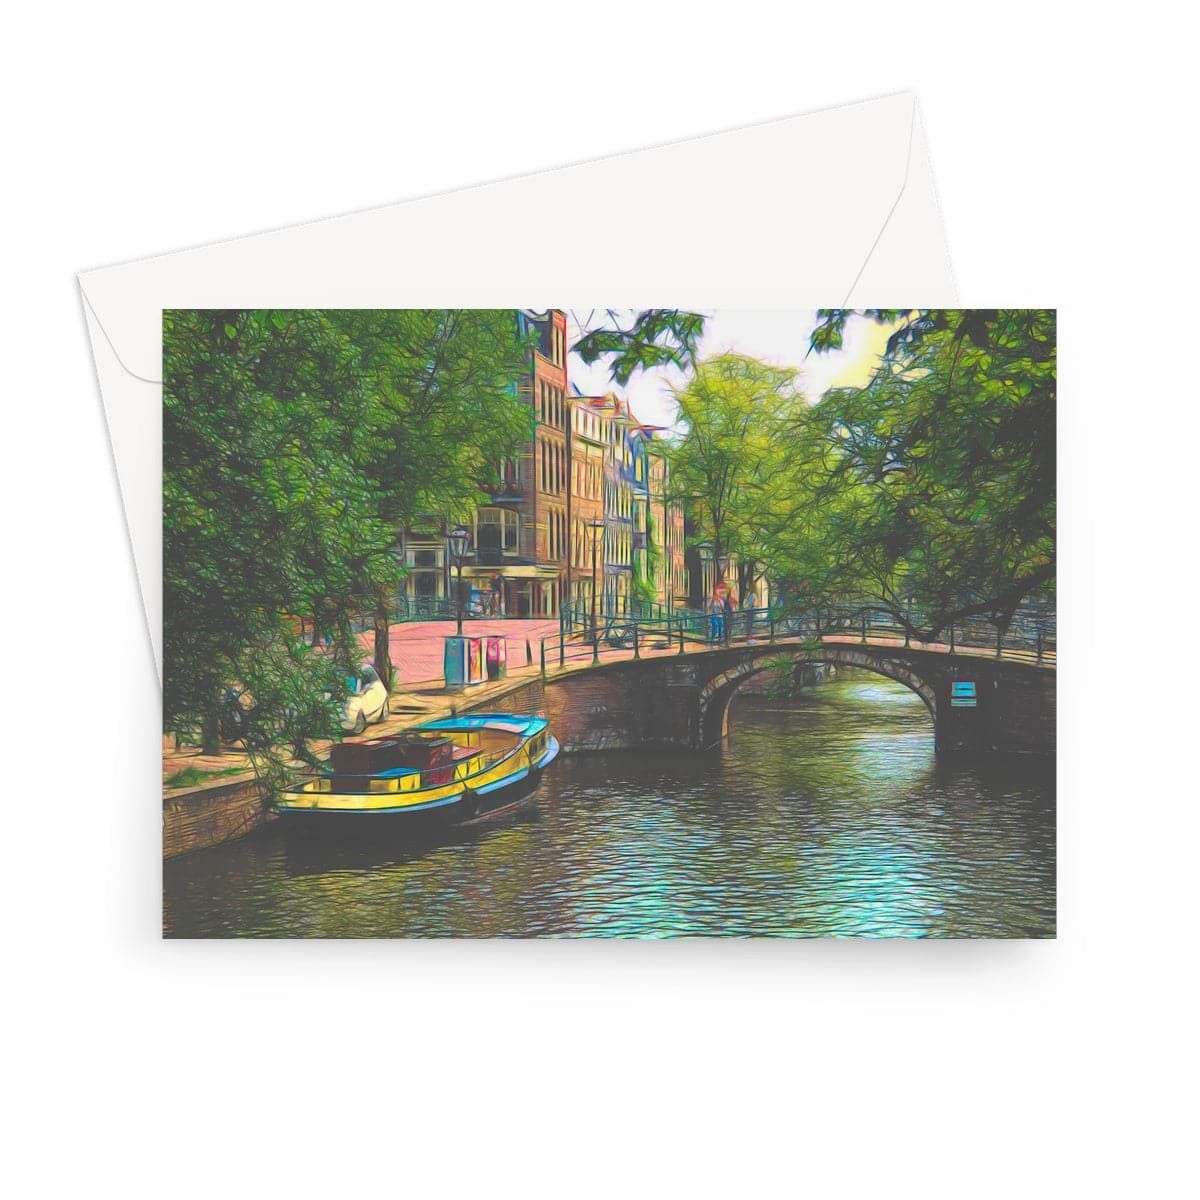 Boat and bridge in Amsterdam,  Art on a Greeting Card, by Sensus Studio